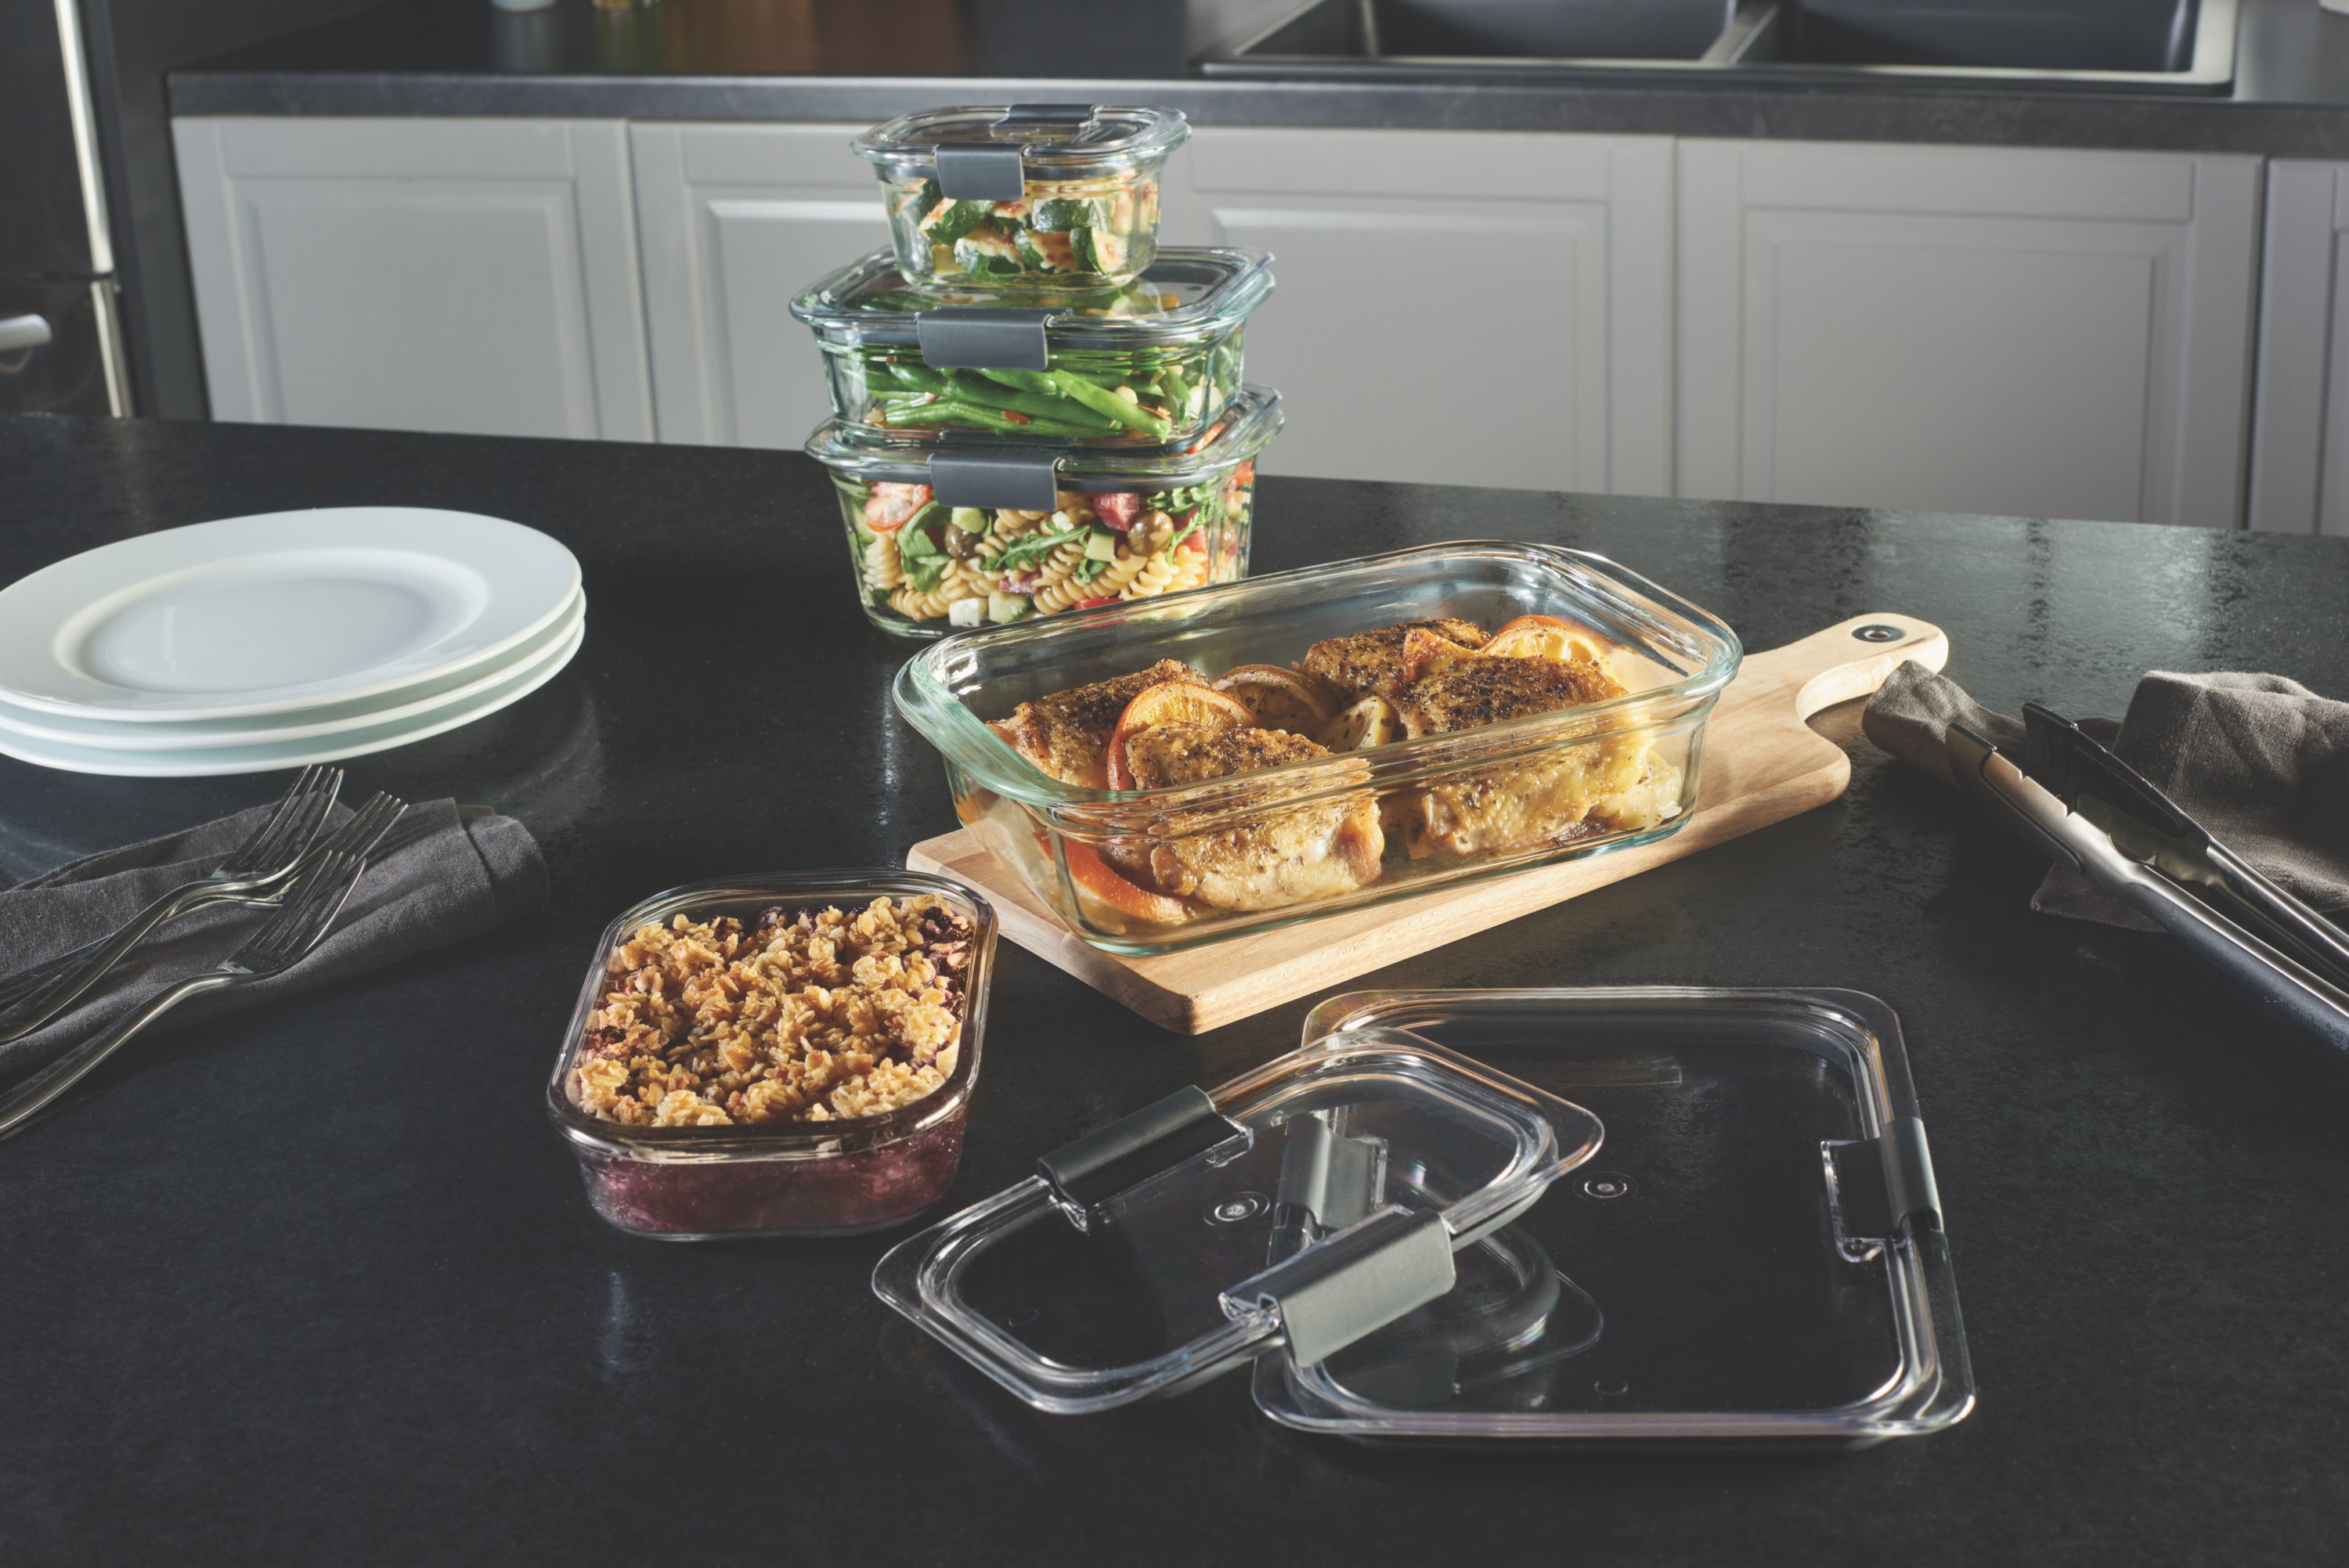 https://s7d9.scene7.com/is/image/NewellRubbermaid/SAP-rubbermaid-food-storage-brilliance-glass-clear-assorted-with-food-overhead-lifestyle